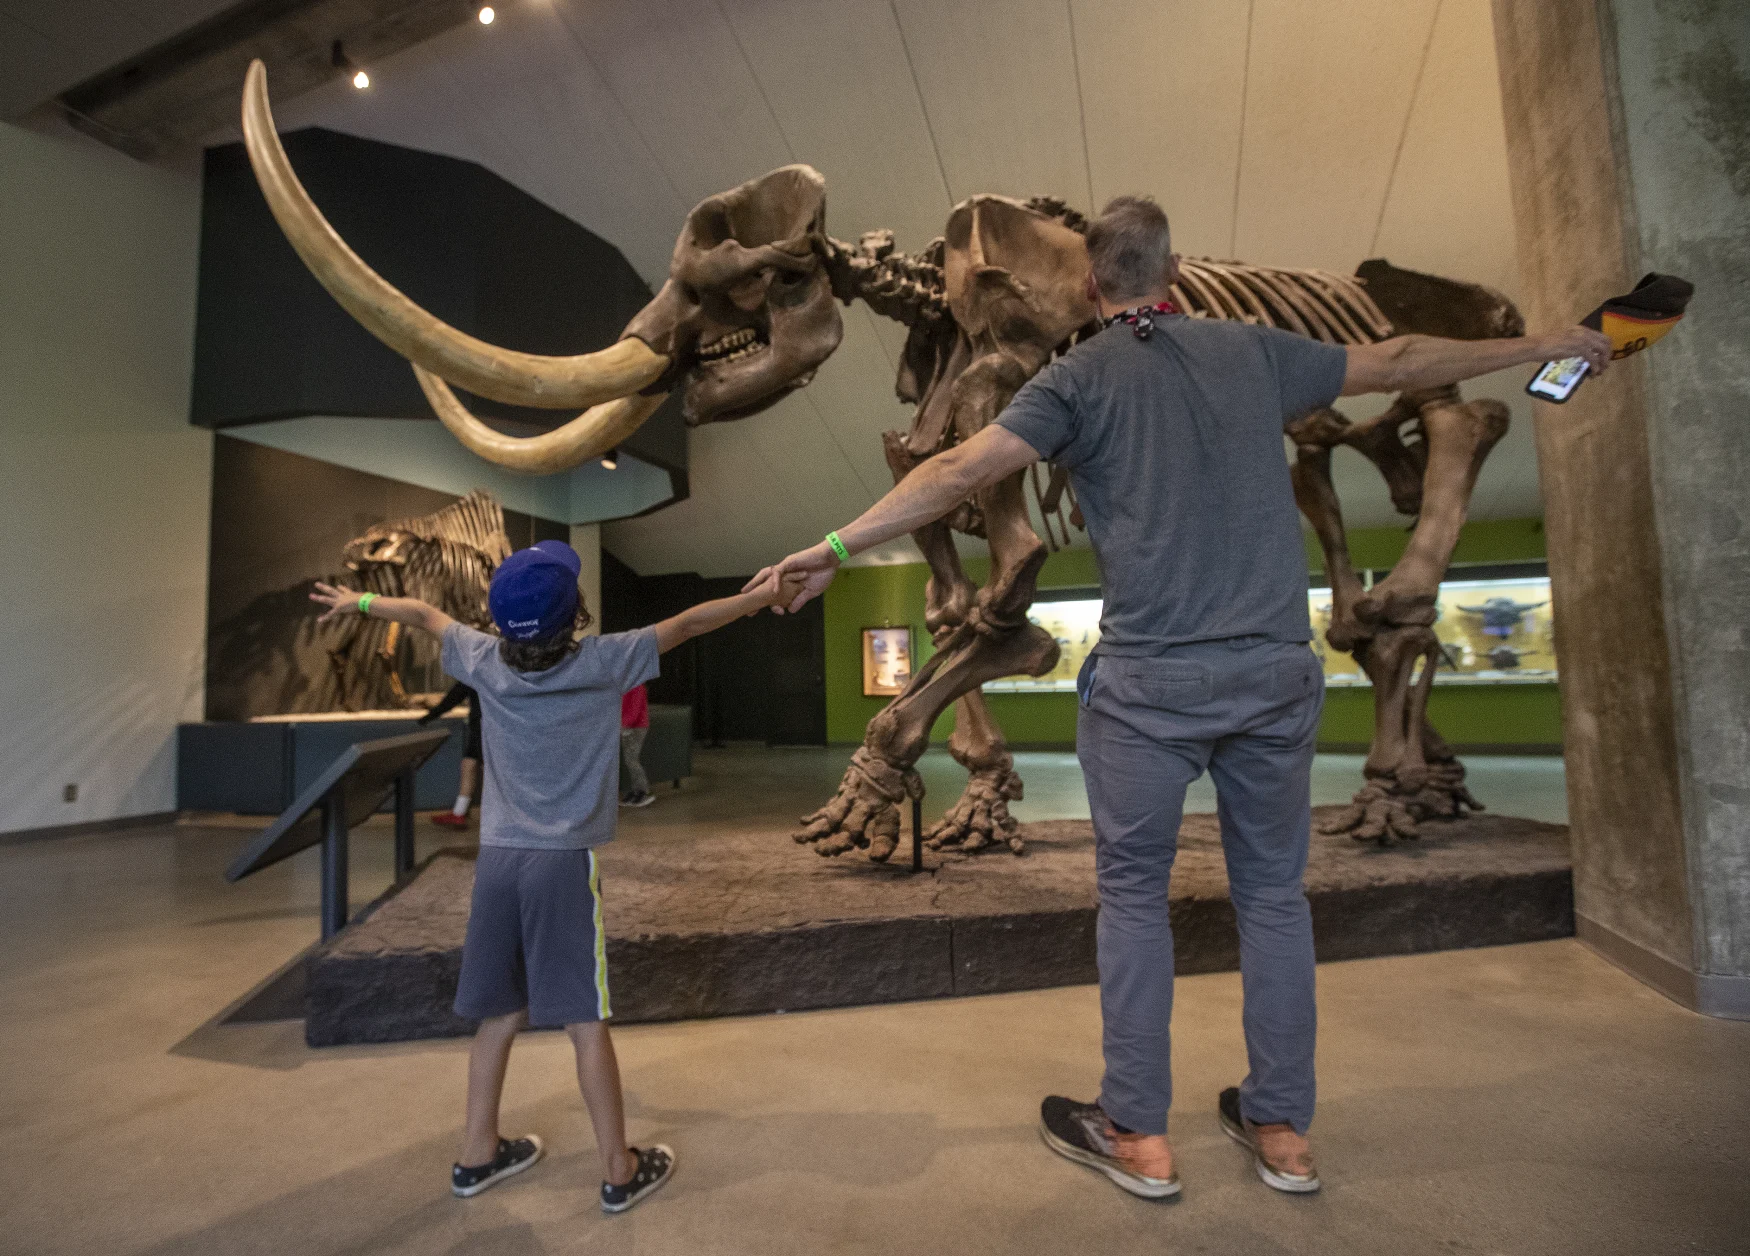 LOS ANGELES, CA - APRIL 08, 2021:Connor Matlen, 6, and his father Logan 45, of Hawthorne, spread their arms out to try and cover the length of American mastodon on exhibit at The La Brea Tar Pits in Los Angeles that re-opened to the public after being closed for over a year due to the COVID-19 outbreak. The American mastodon existed from 2 million to 10,000 years ago. (Mel Melcon / Los Angeles Times via Getty Images)